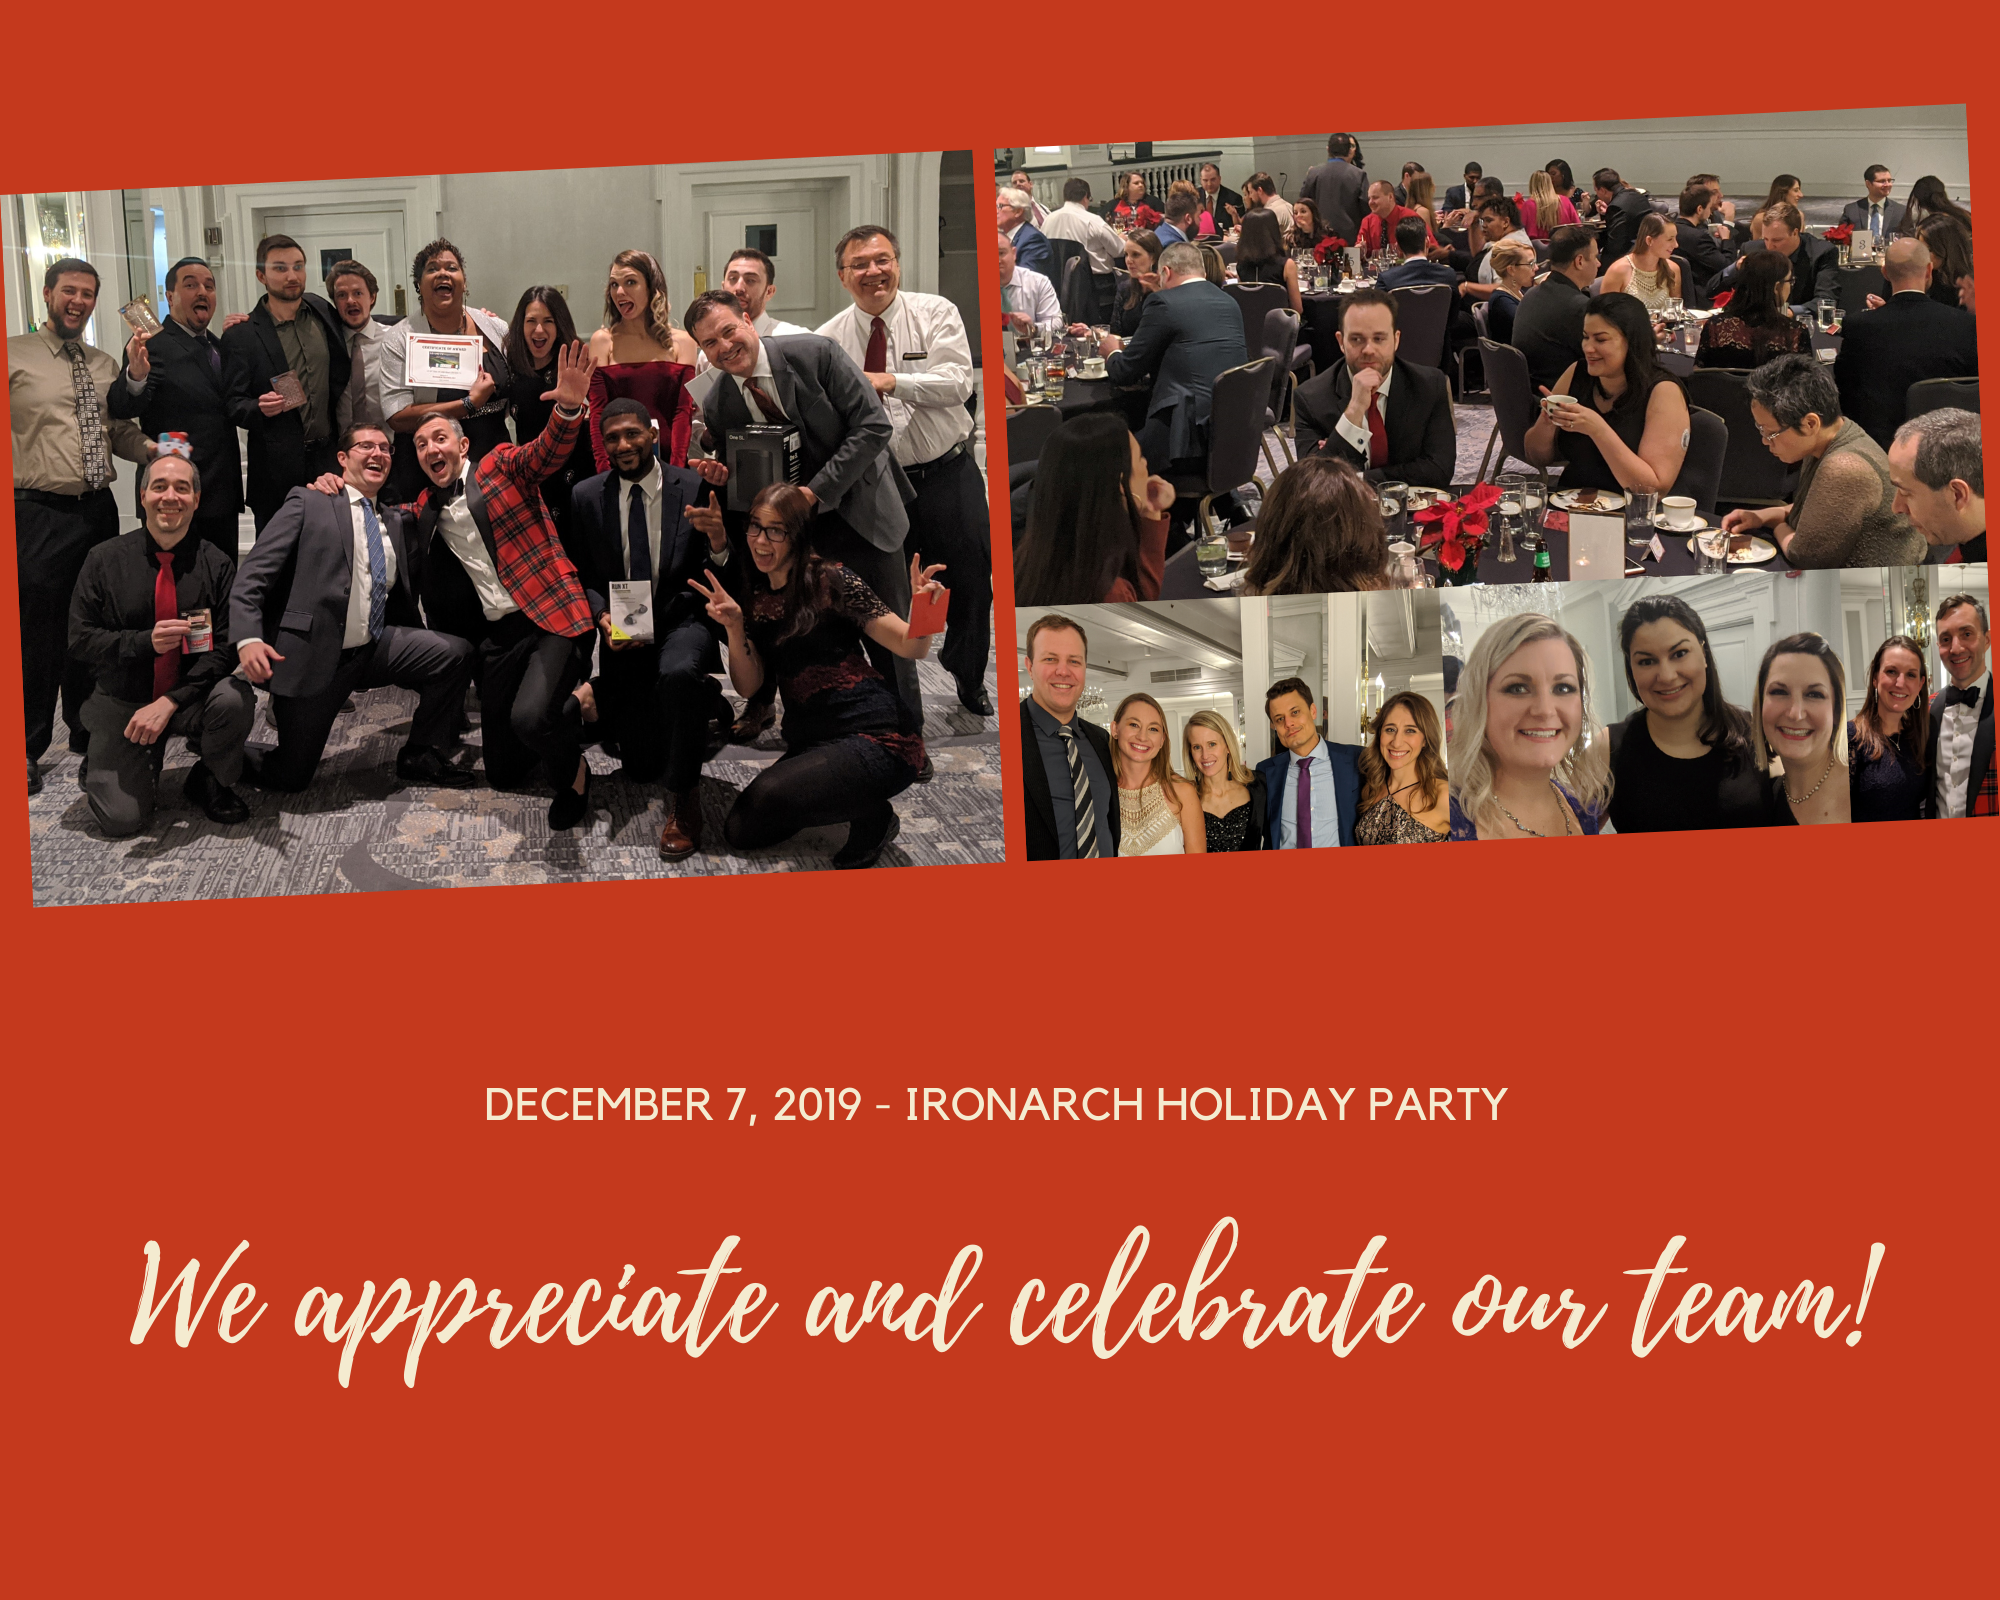 IronArch holiday party. Text reads: We appreciate and celebrate our team!